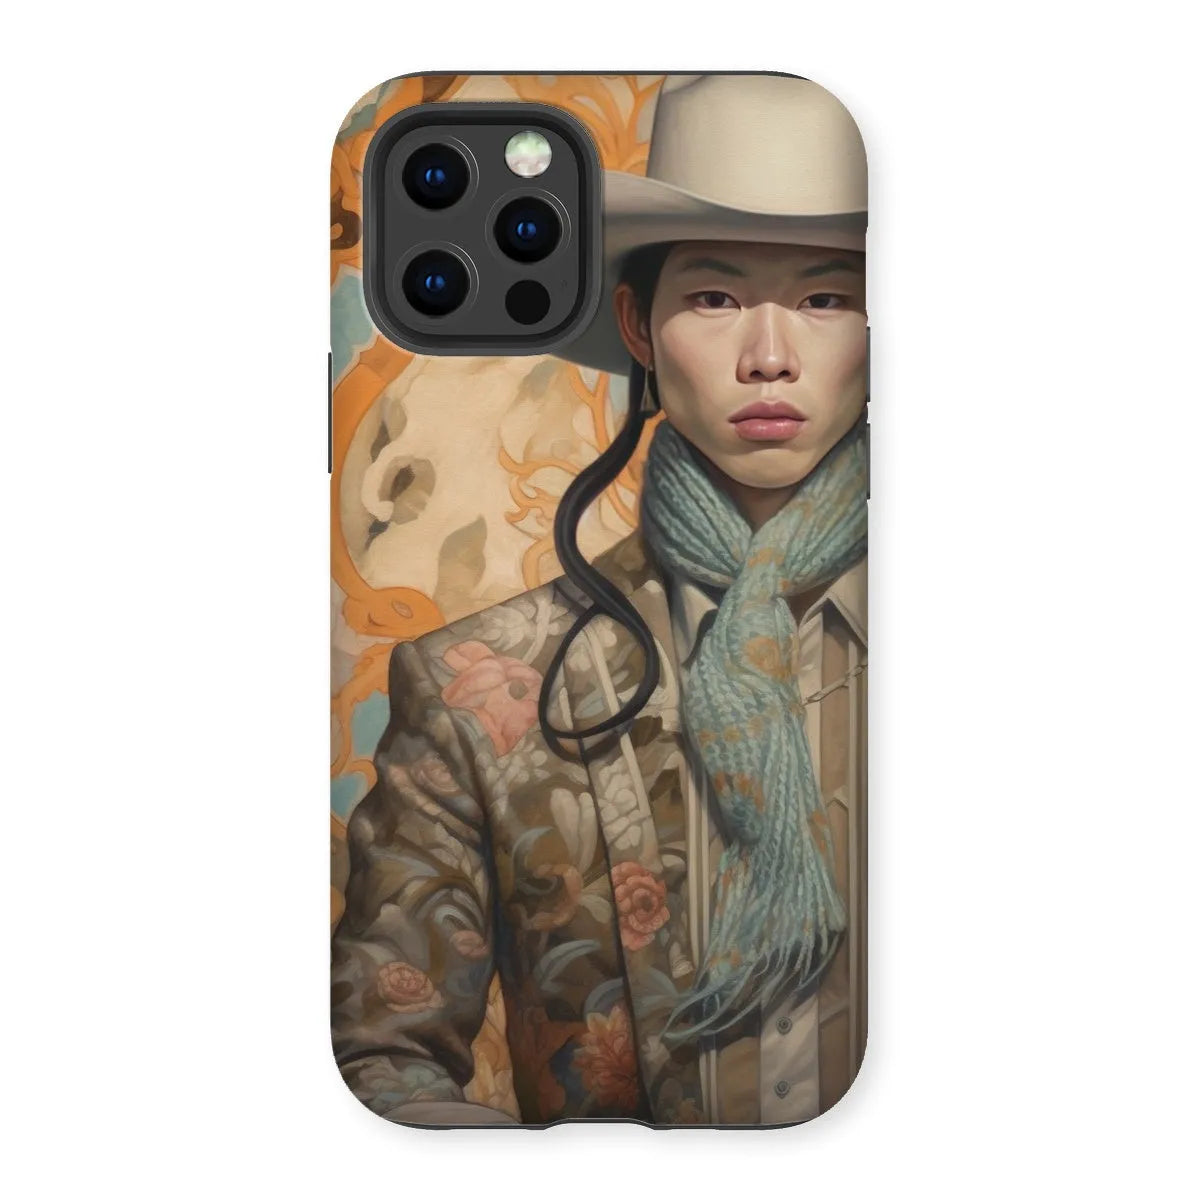 Baihu The Gay Cowboy - Gay Aesthetic Art Phone Case - Iphone 12 Pro / Matte - Mobile Phone Cases - Aesthetic Art